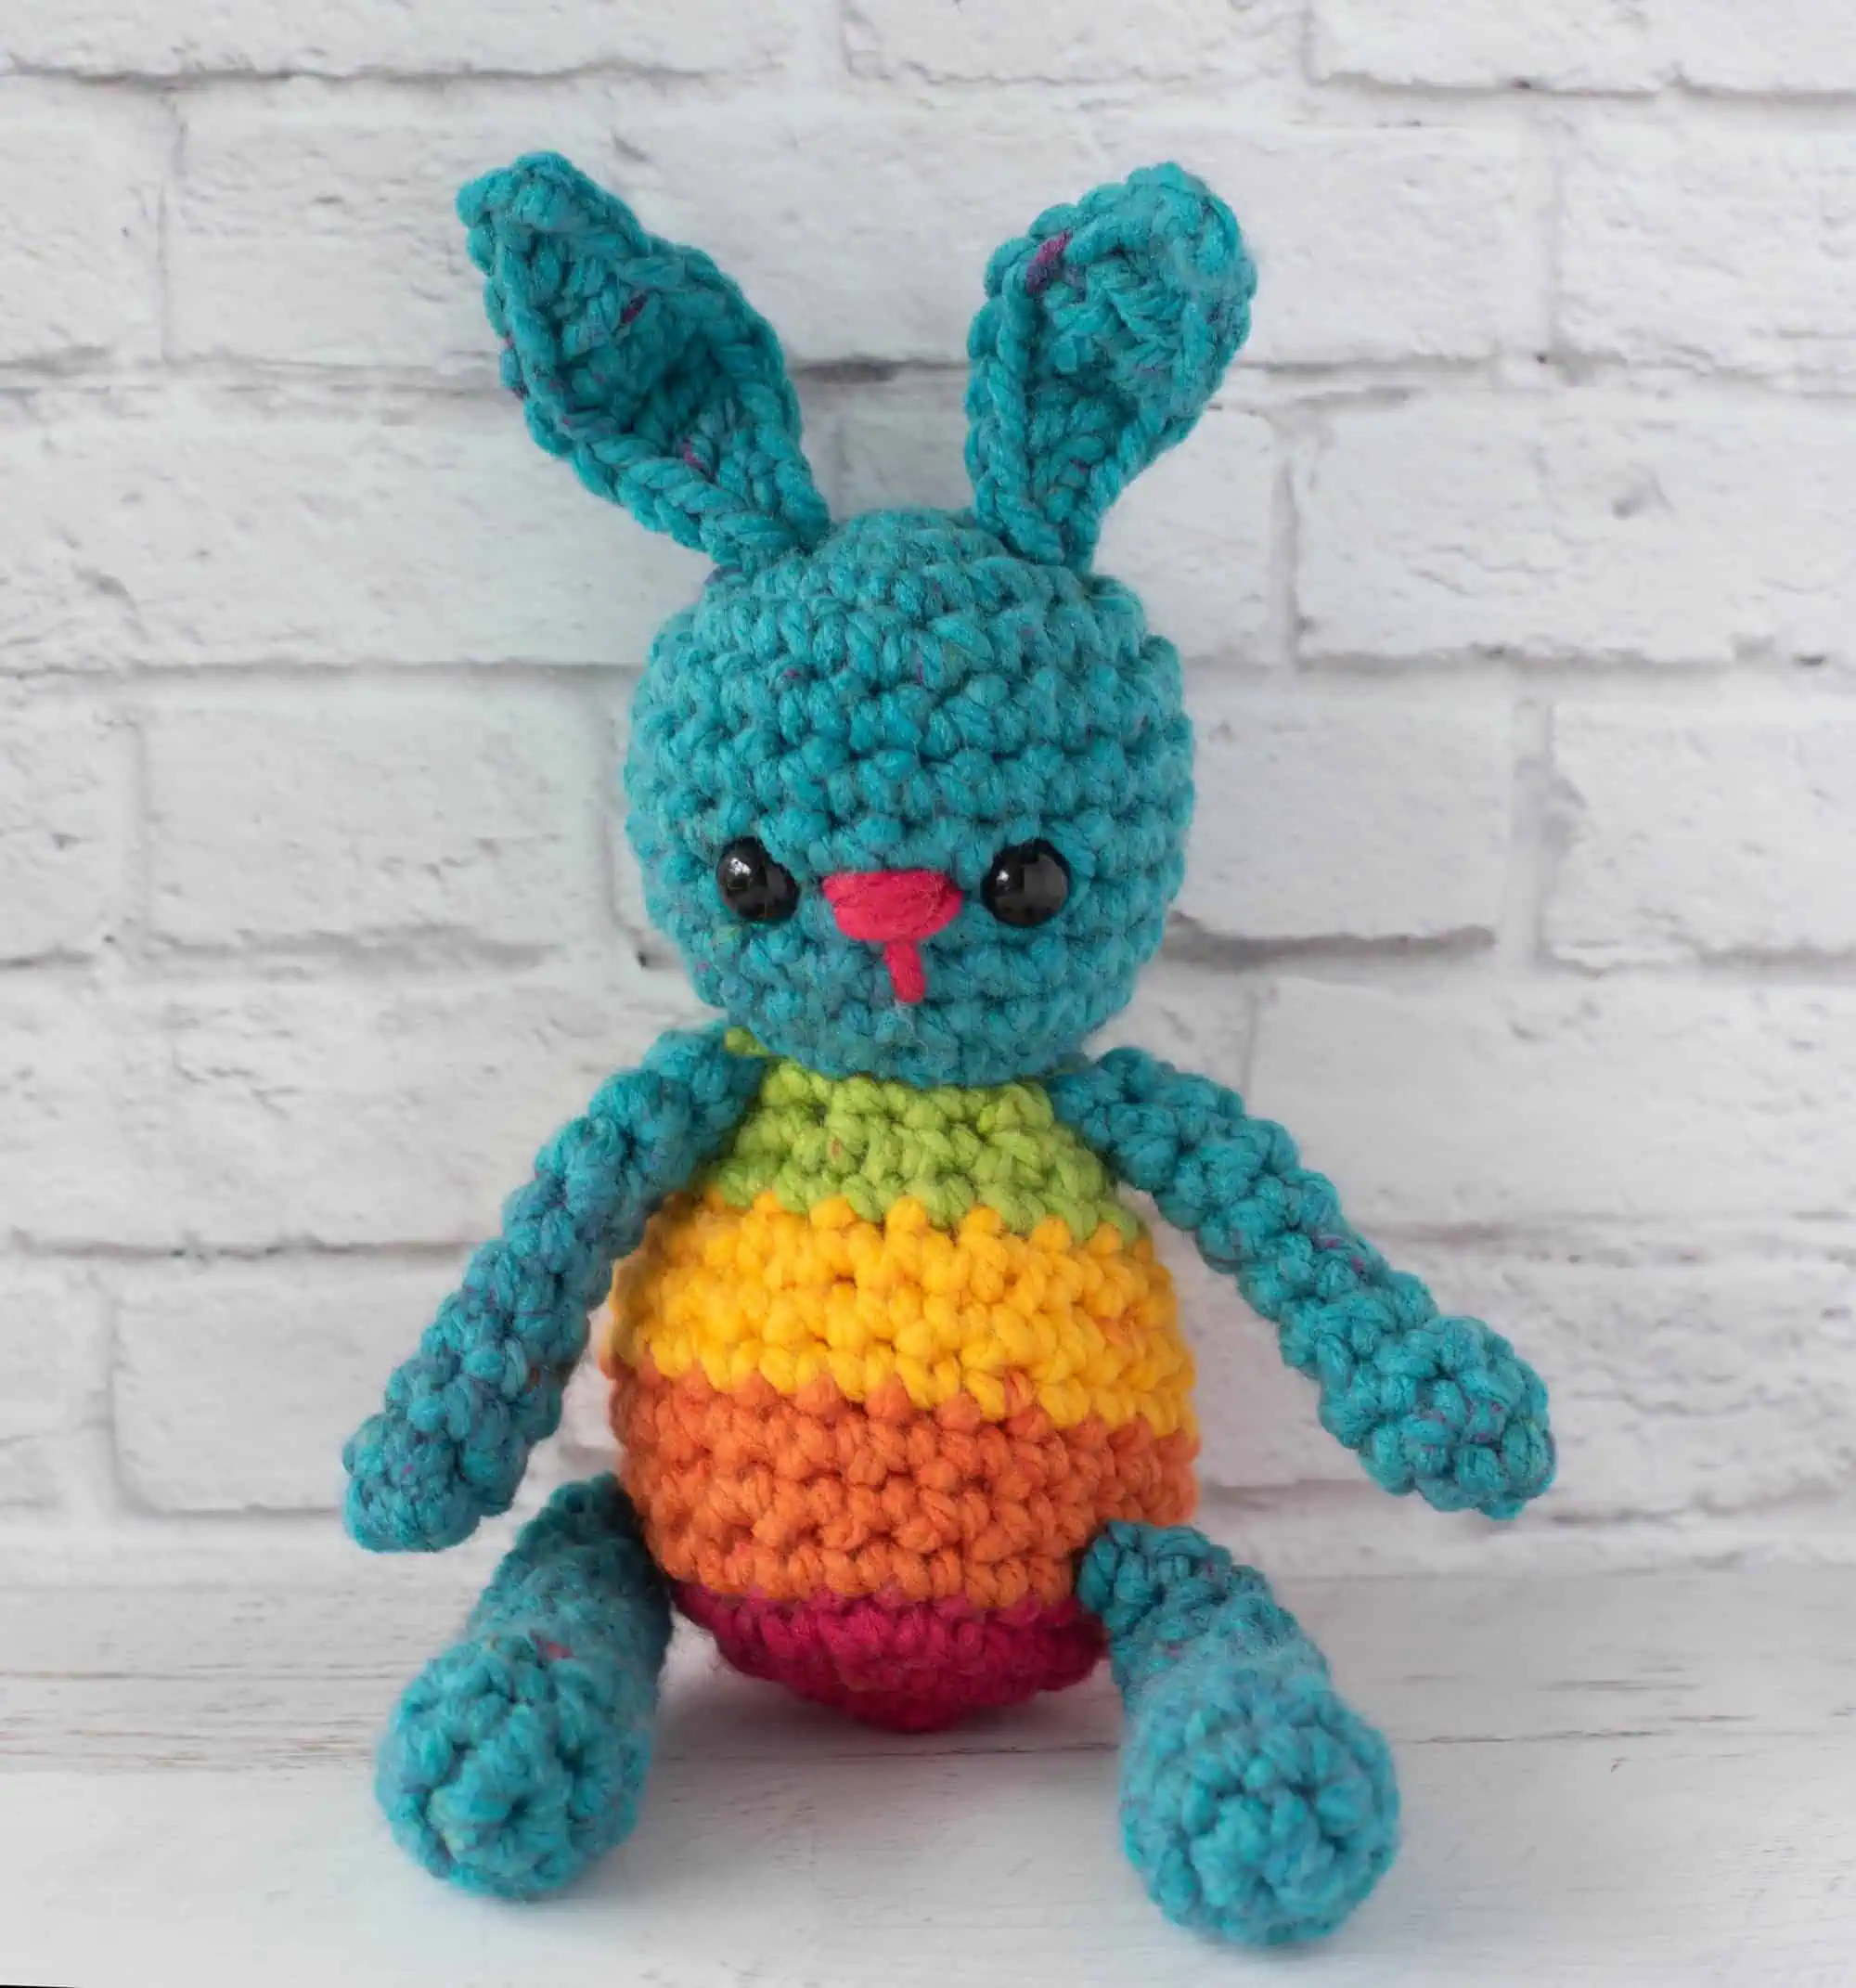 Blue crochet bunny with a rainbow striped body sitting in front of brick wall